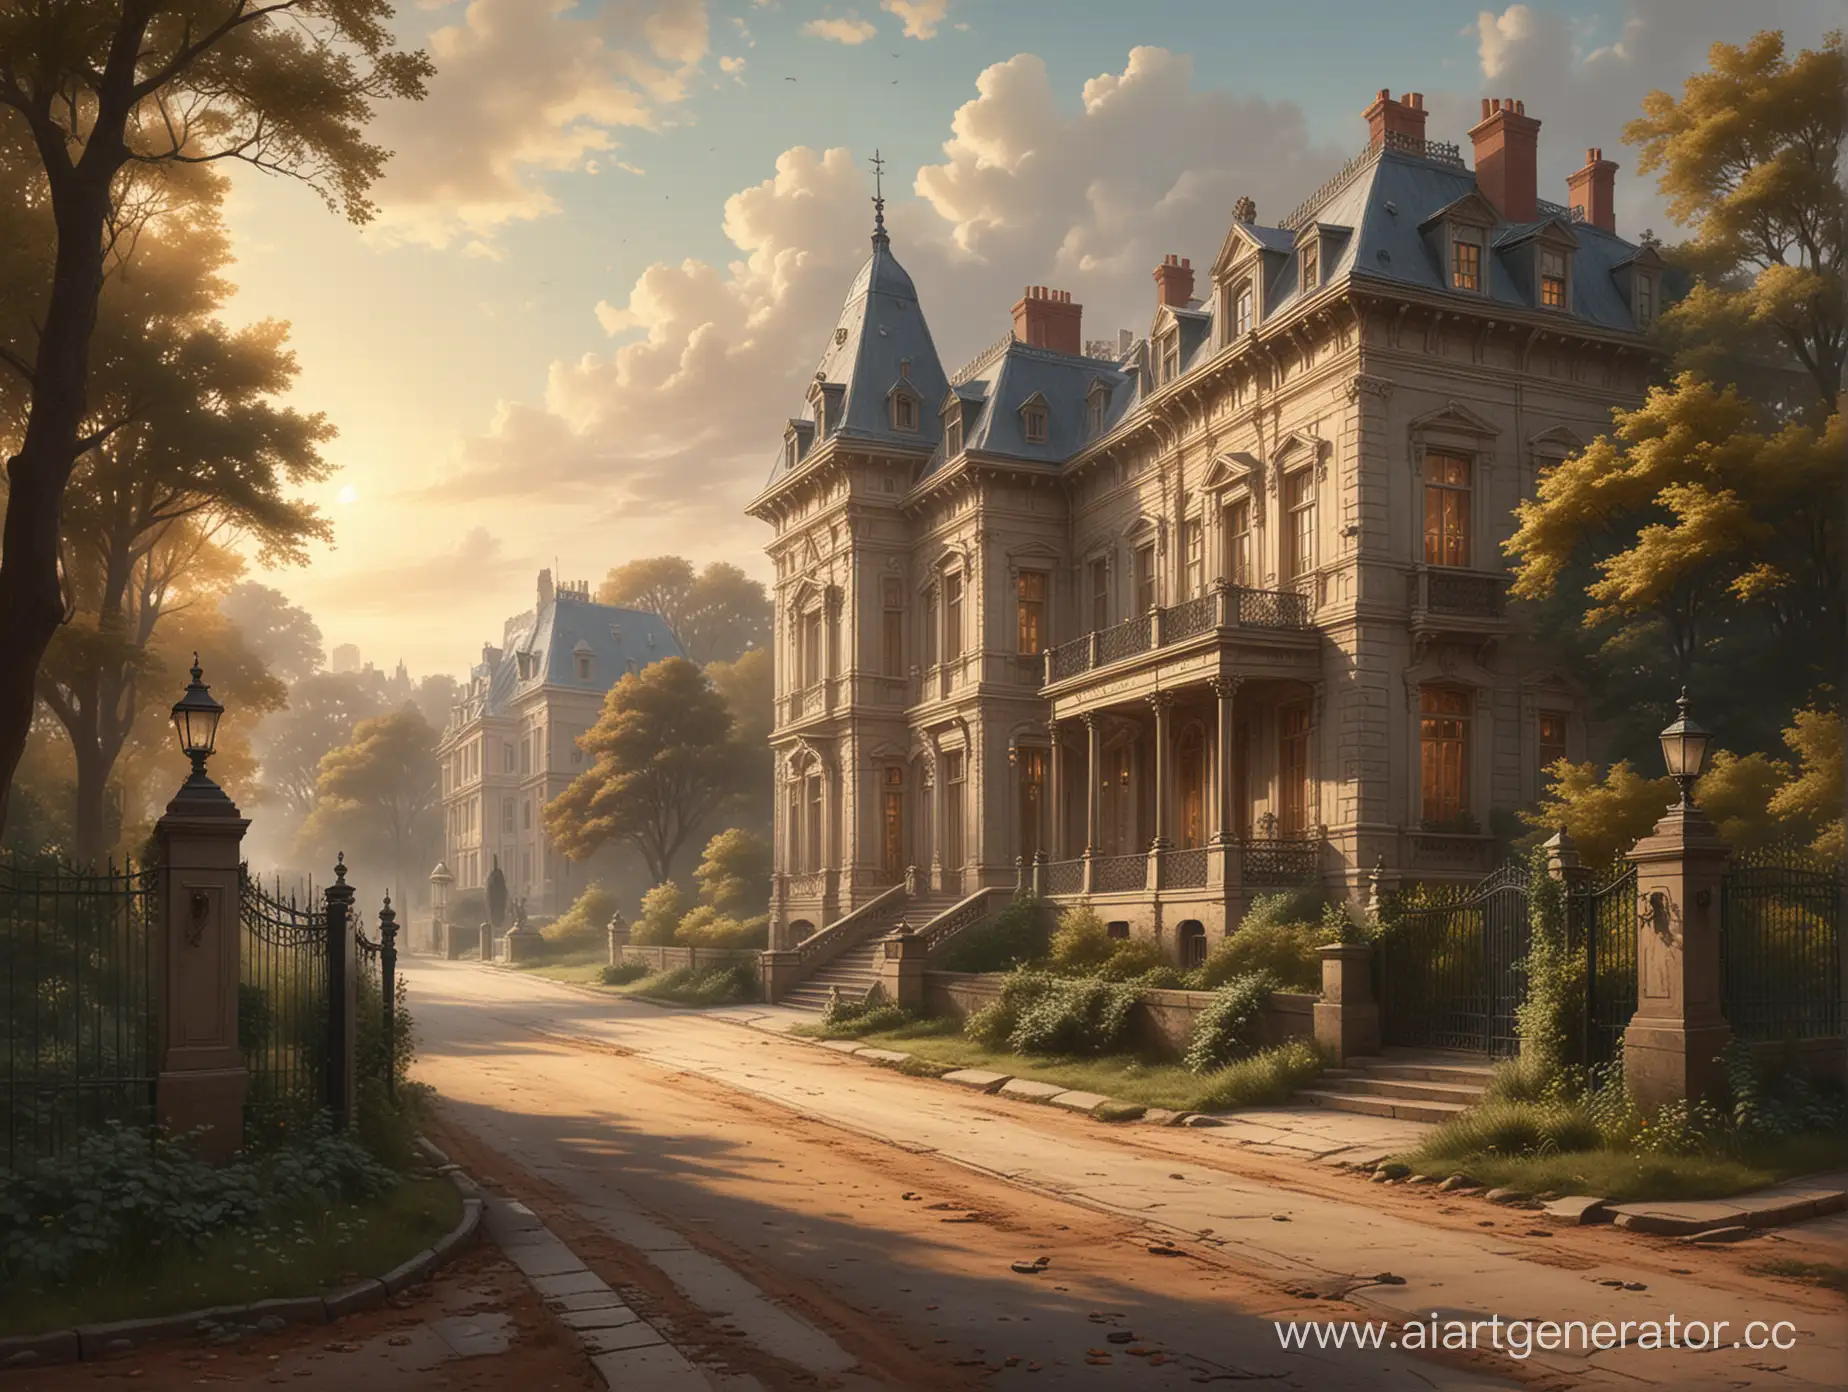 An illustration that conveys the atmosphere of 19th century using elements of such an era. The image should depict a road and a mansion in a luxurious style typical of that time.